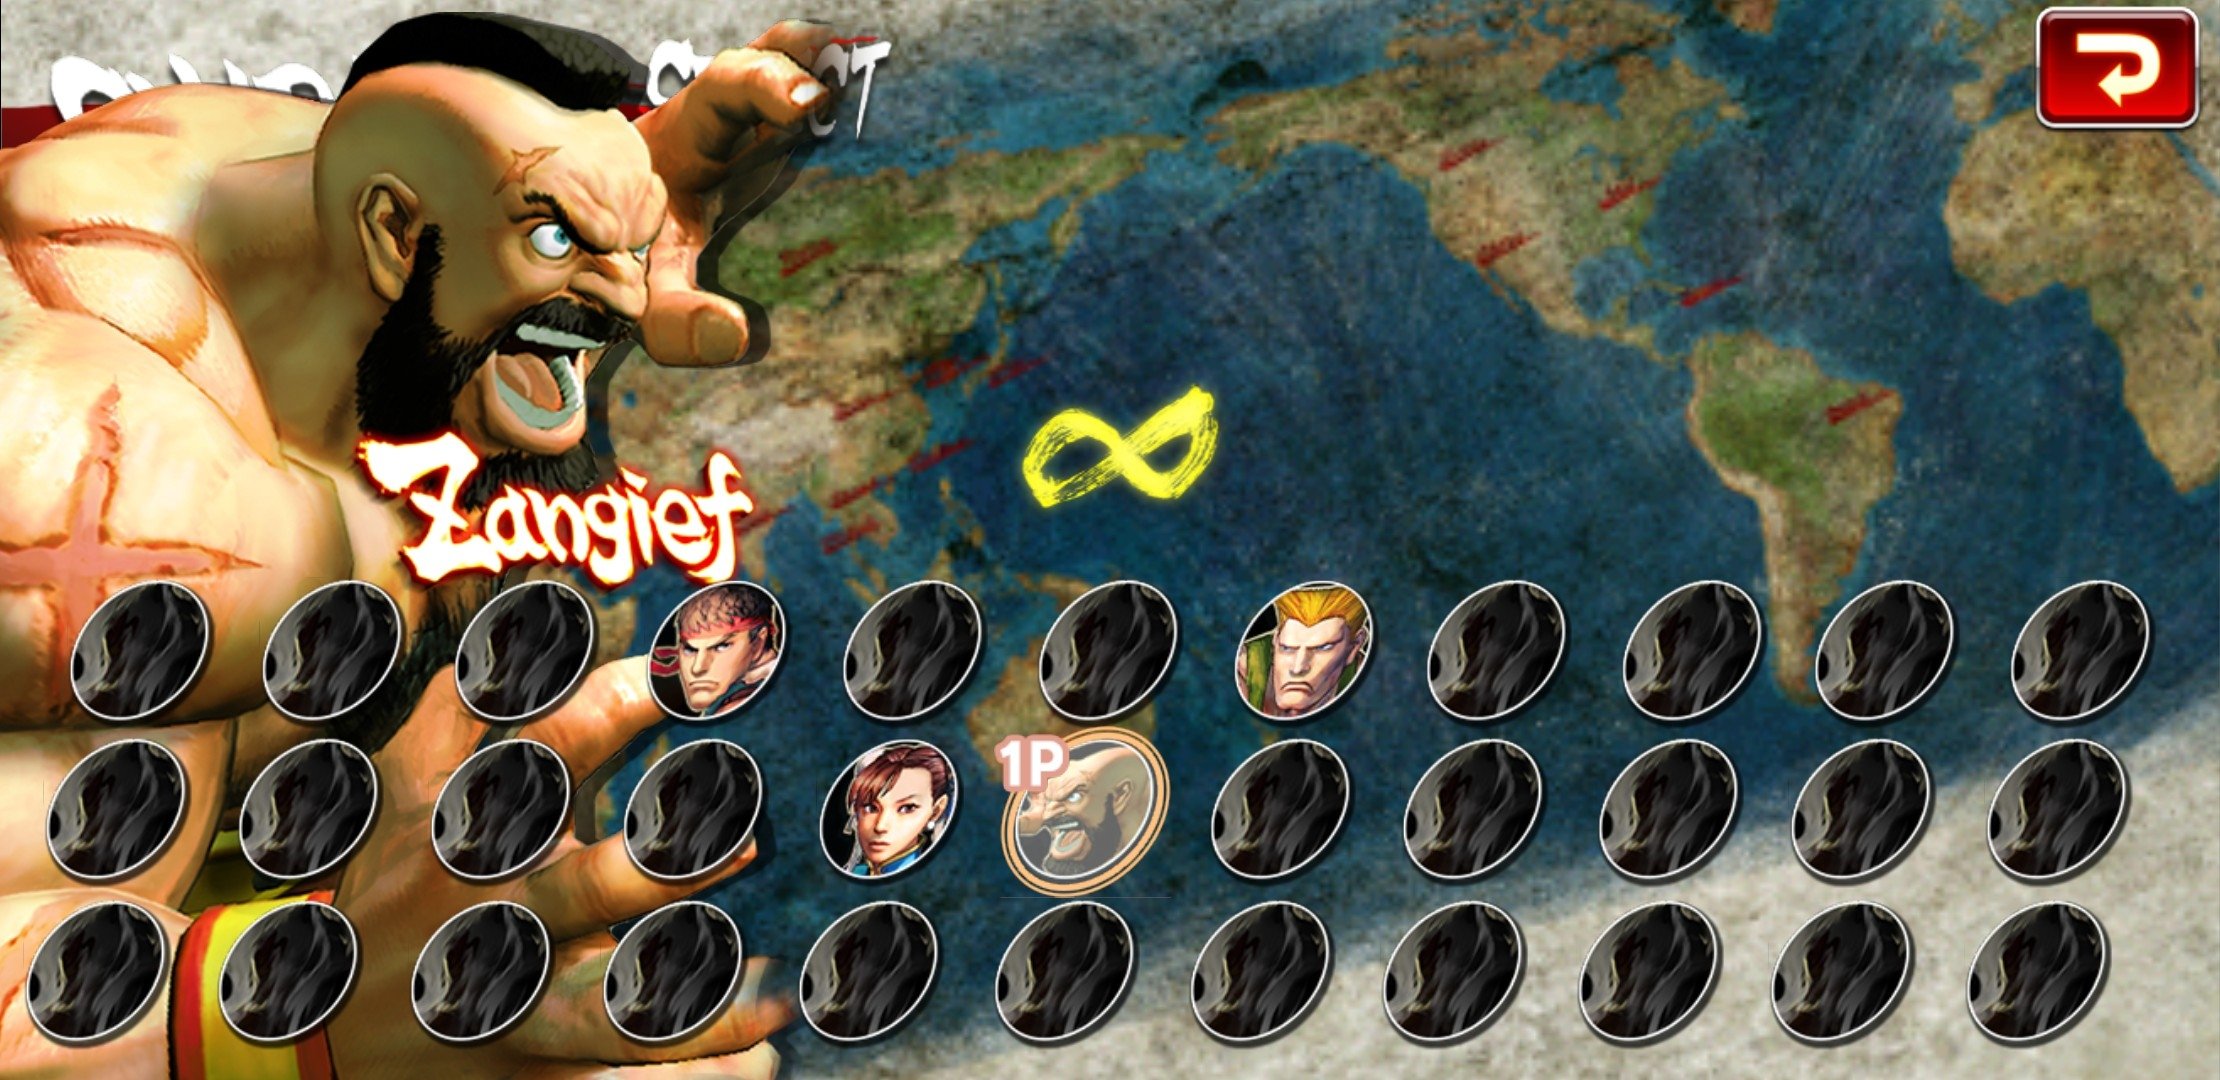 Street Fighter IV Champion Edition - Update Android [Android/IOS